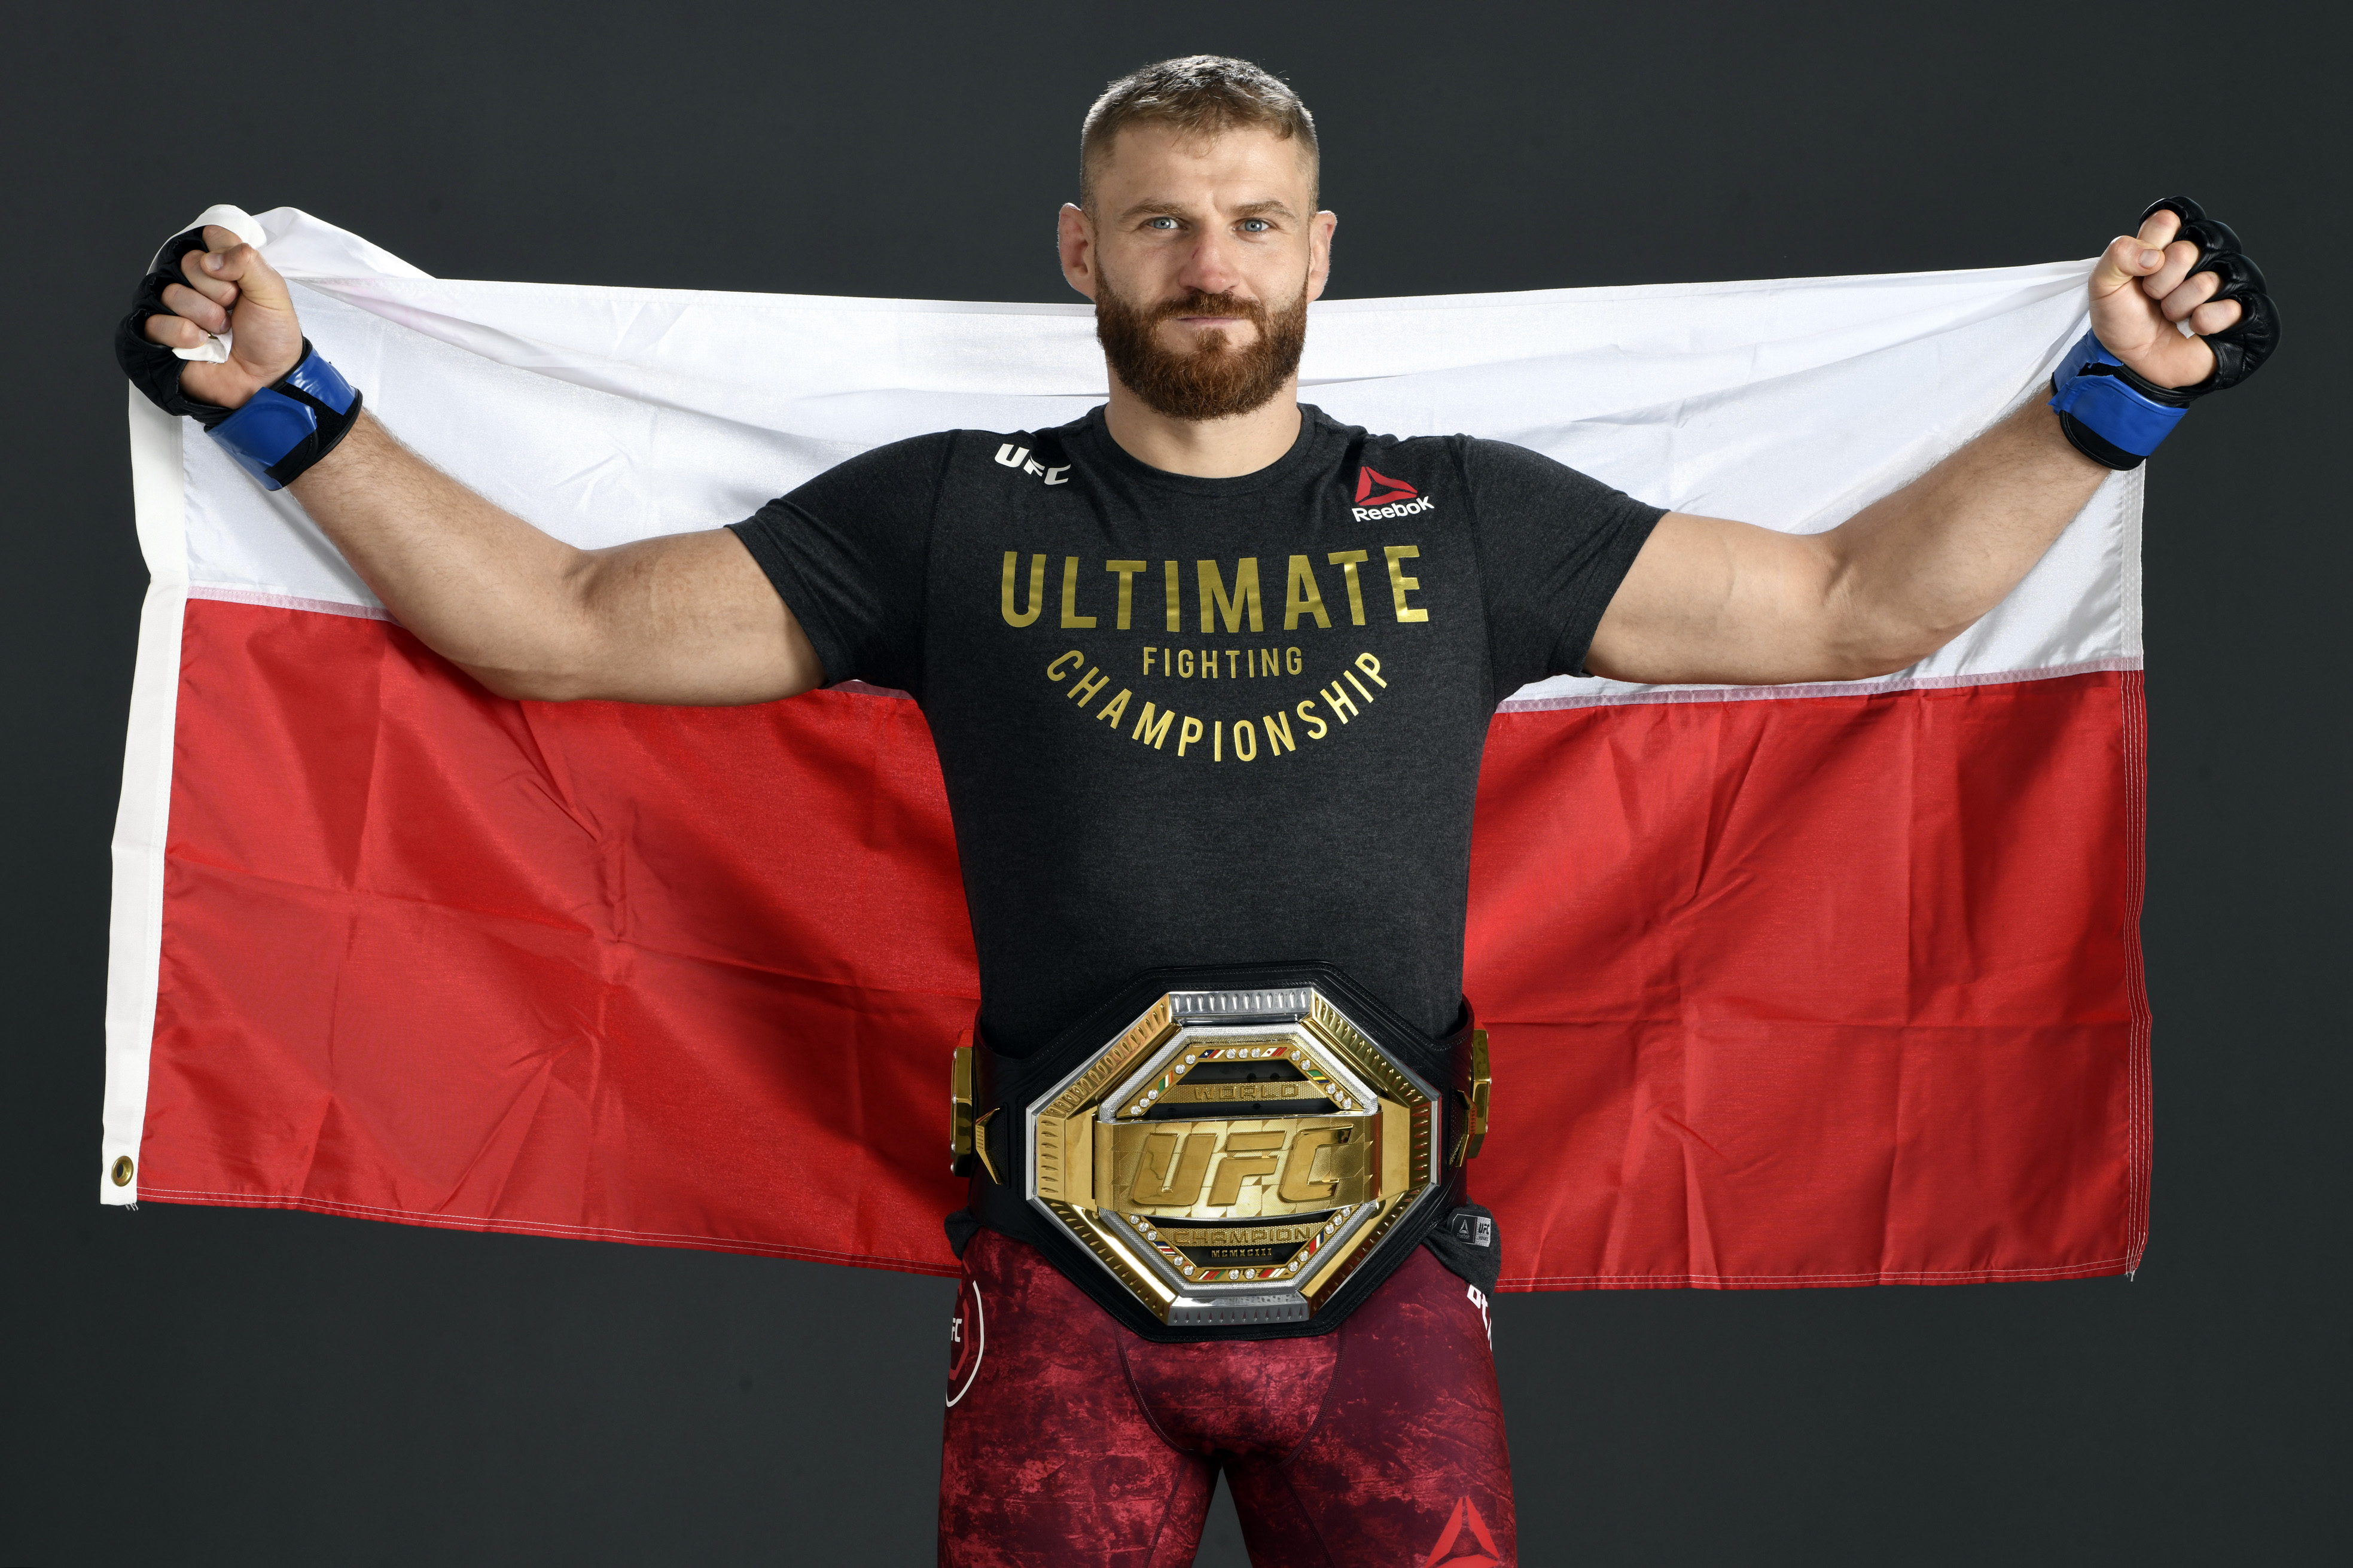 How Jan Blachowicz Became the 1st Male Polish Champion in UFC History